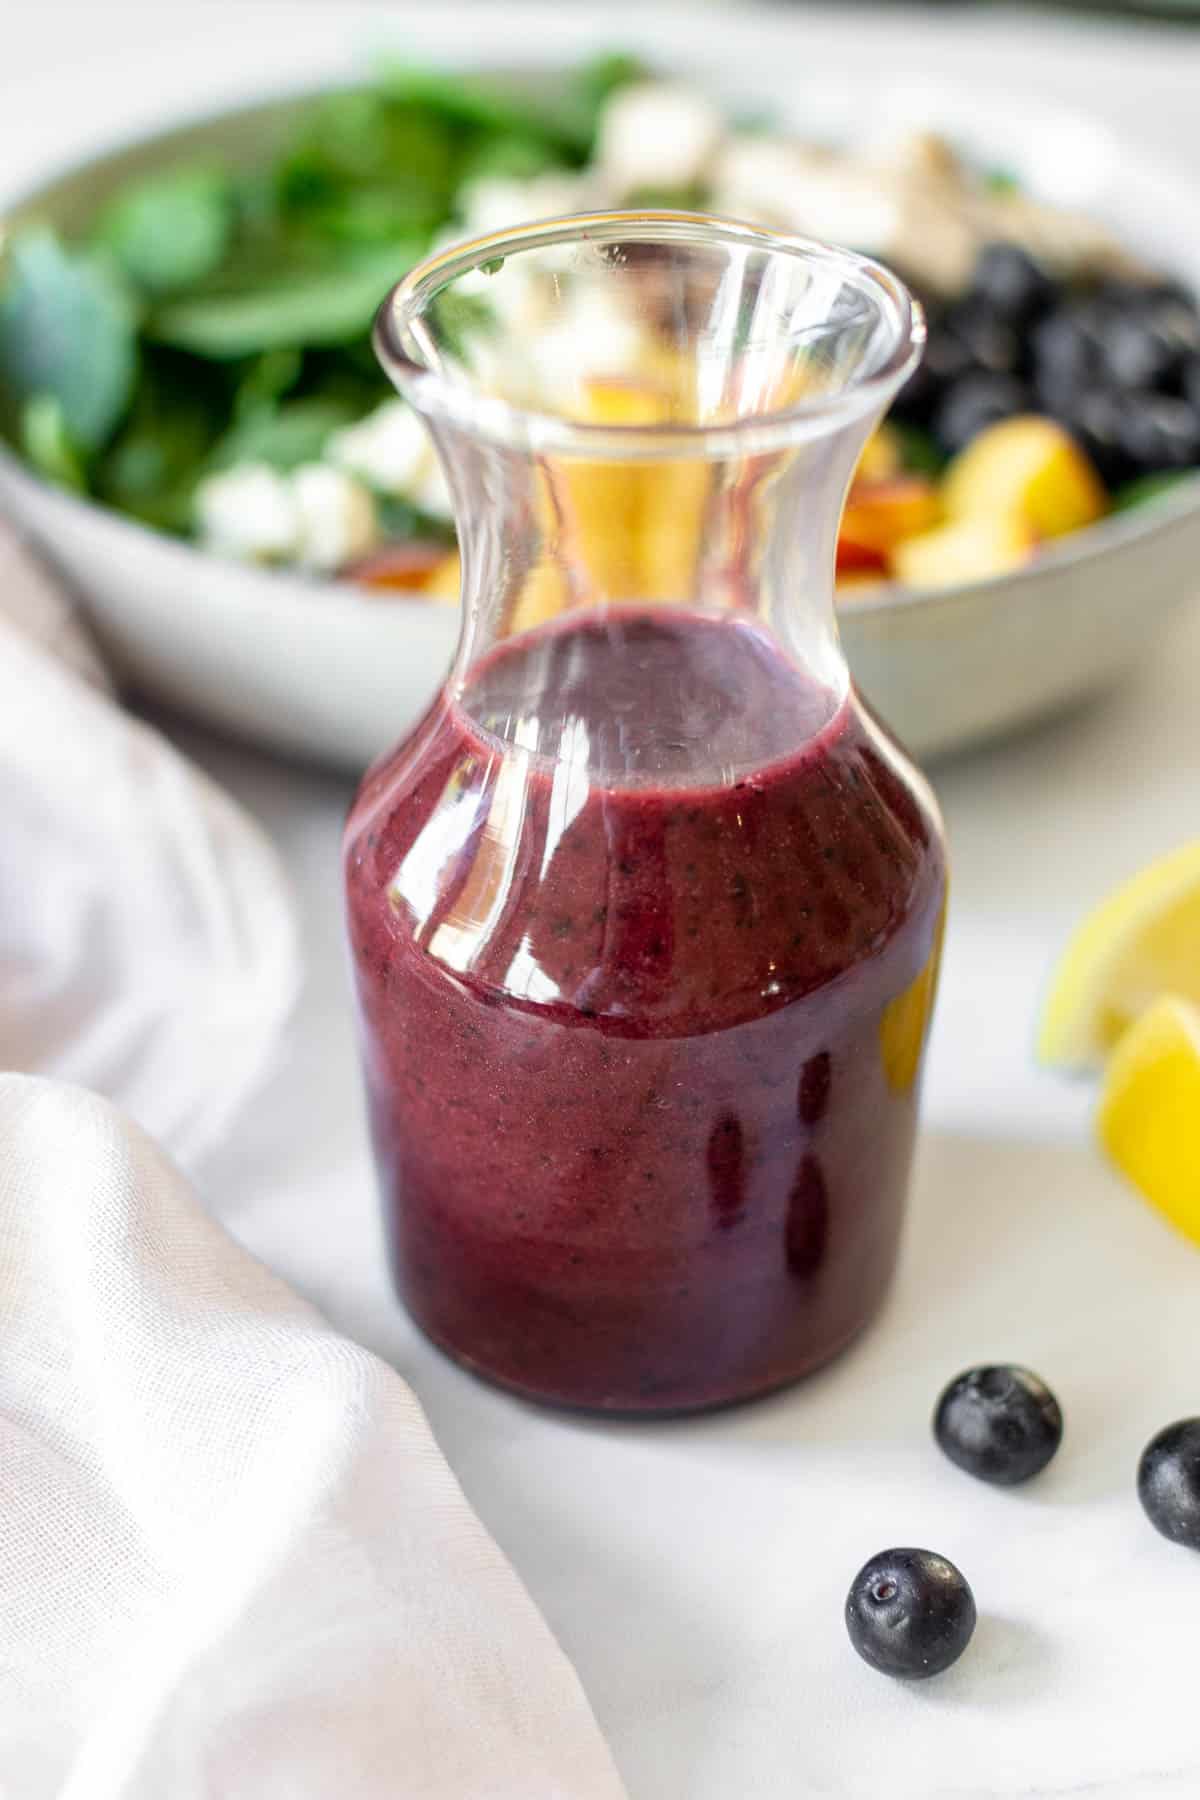 Blueberry salad dressing in a glass carafe in front of a salad.